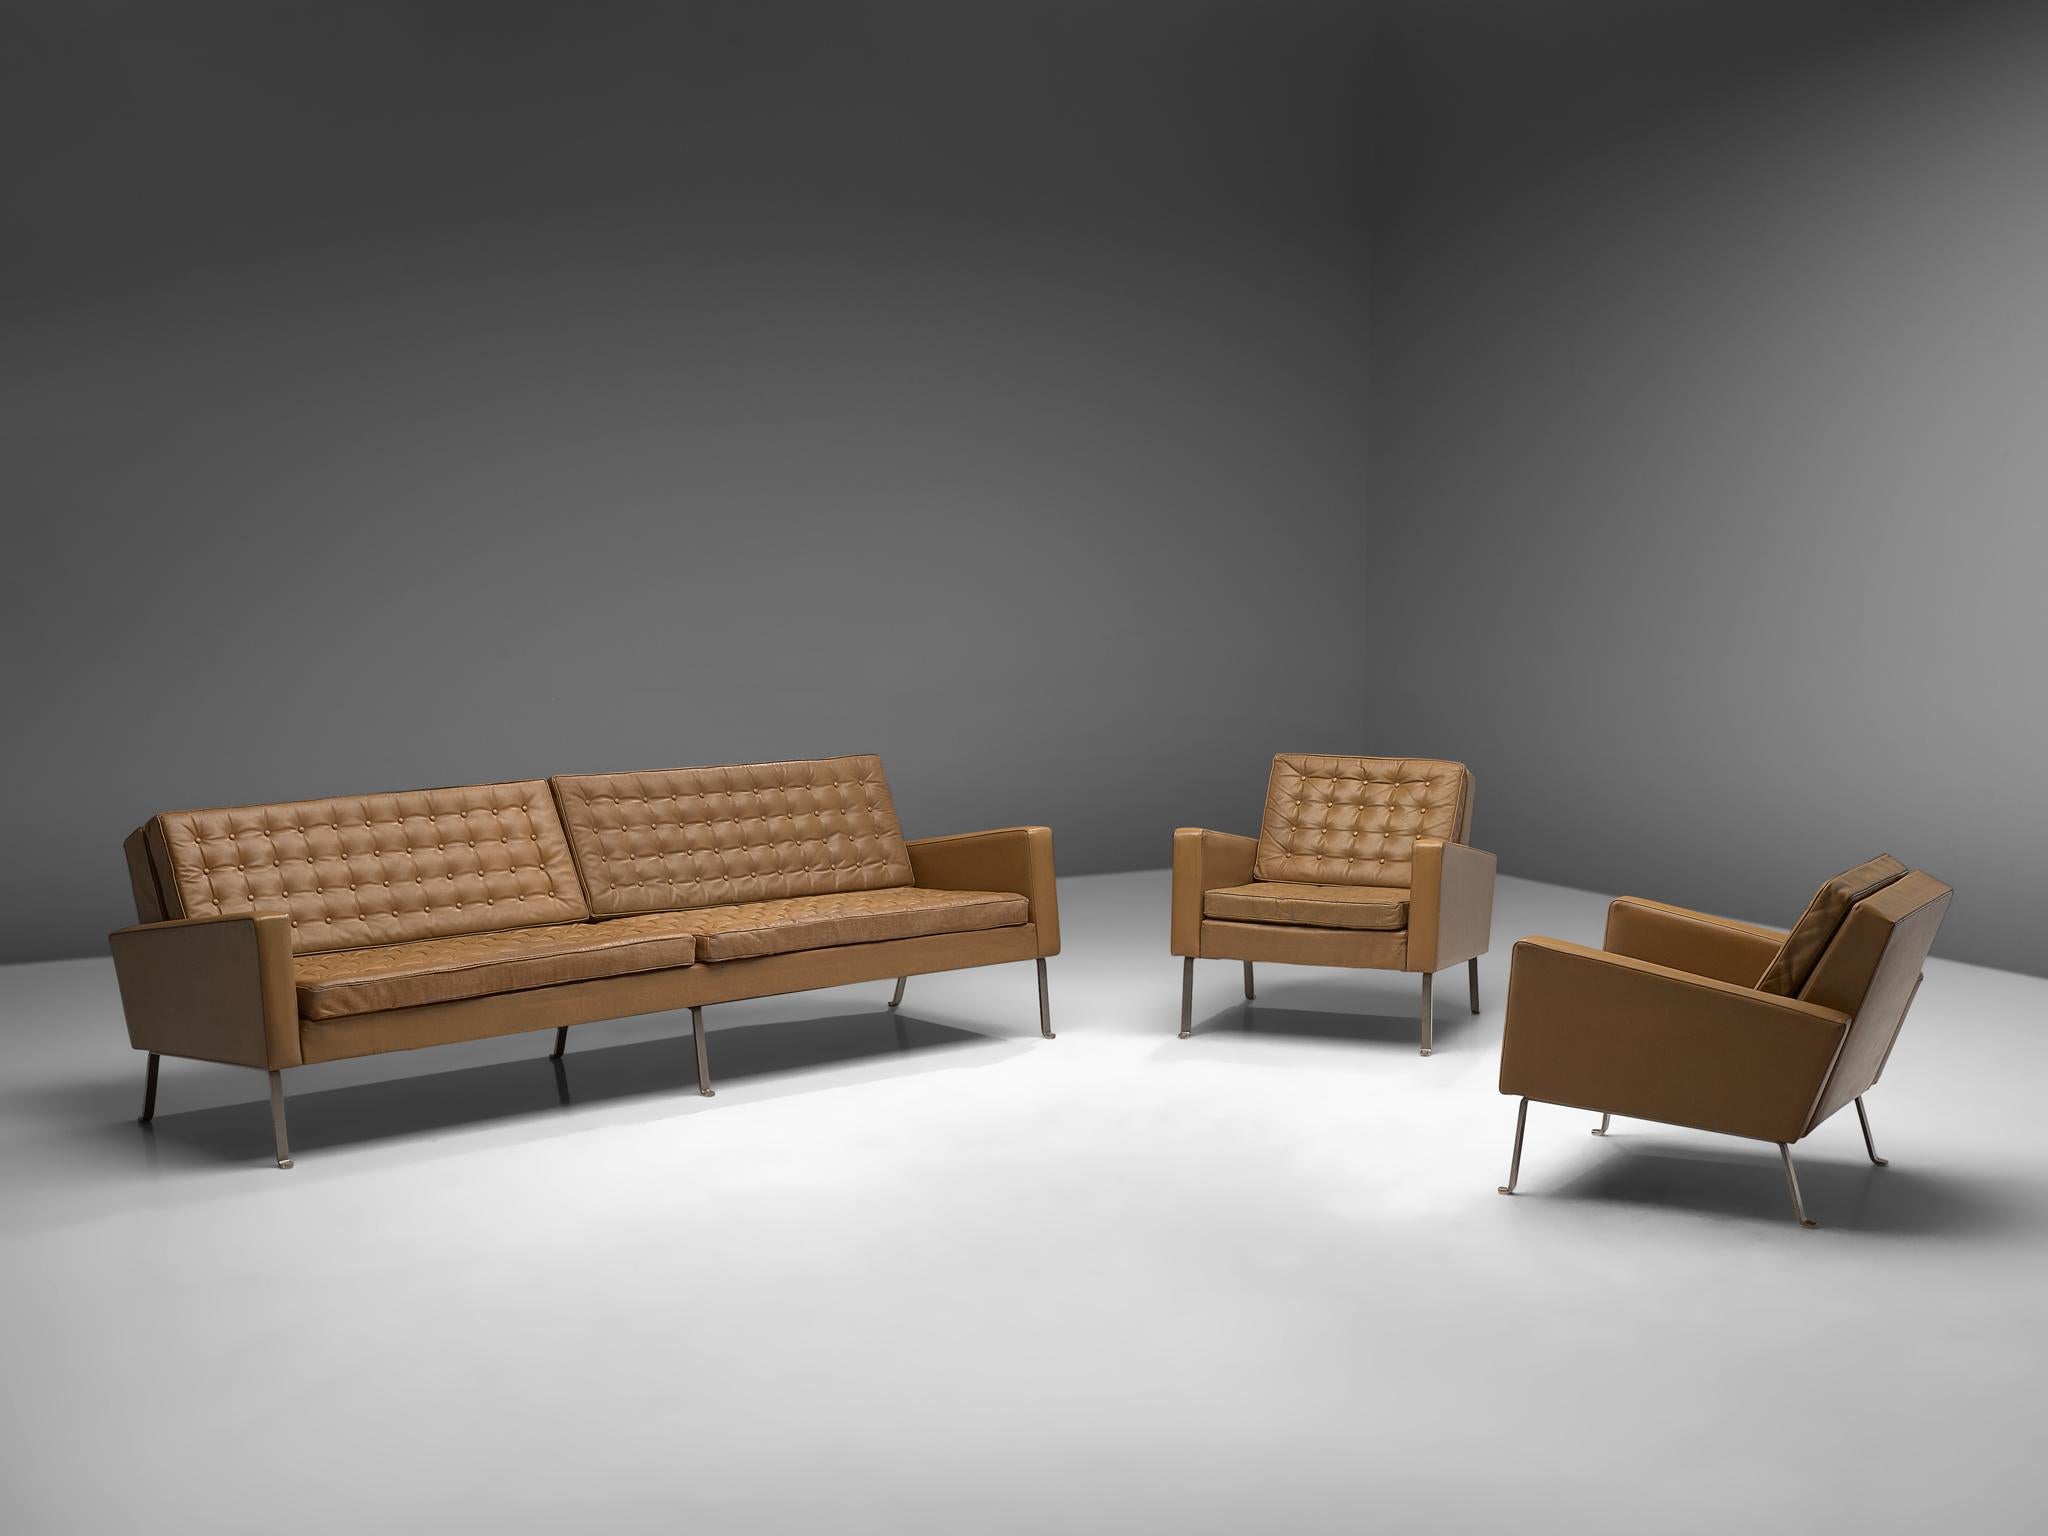 Roland Rainer living room set in leather for Wilkhahn, Germany, 1960s

Modern and beautiful living room set. This set consisting of one large sofa and two chairs features an extraordinary stately design, being both crisp and warm at the same time.